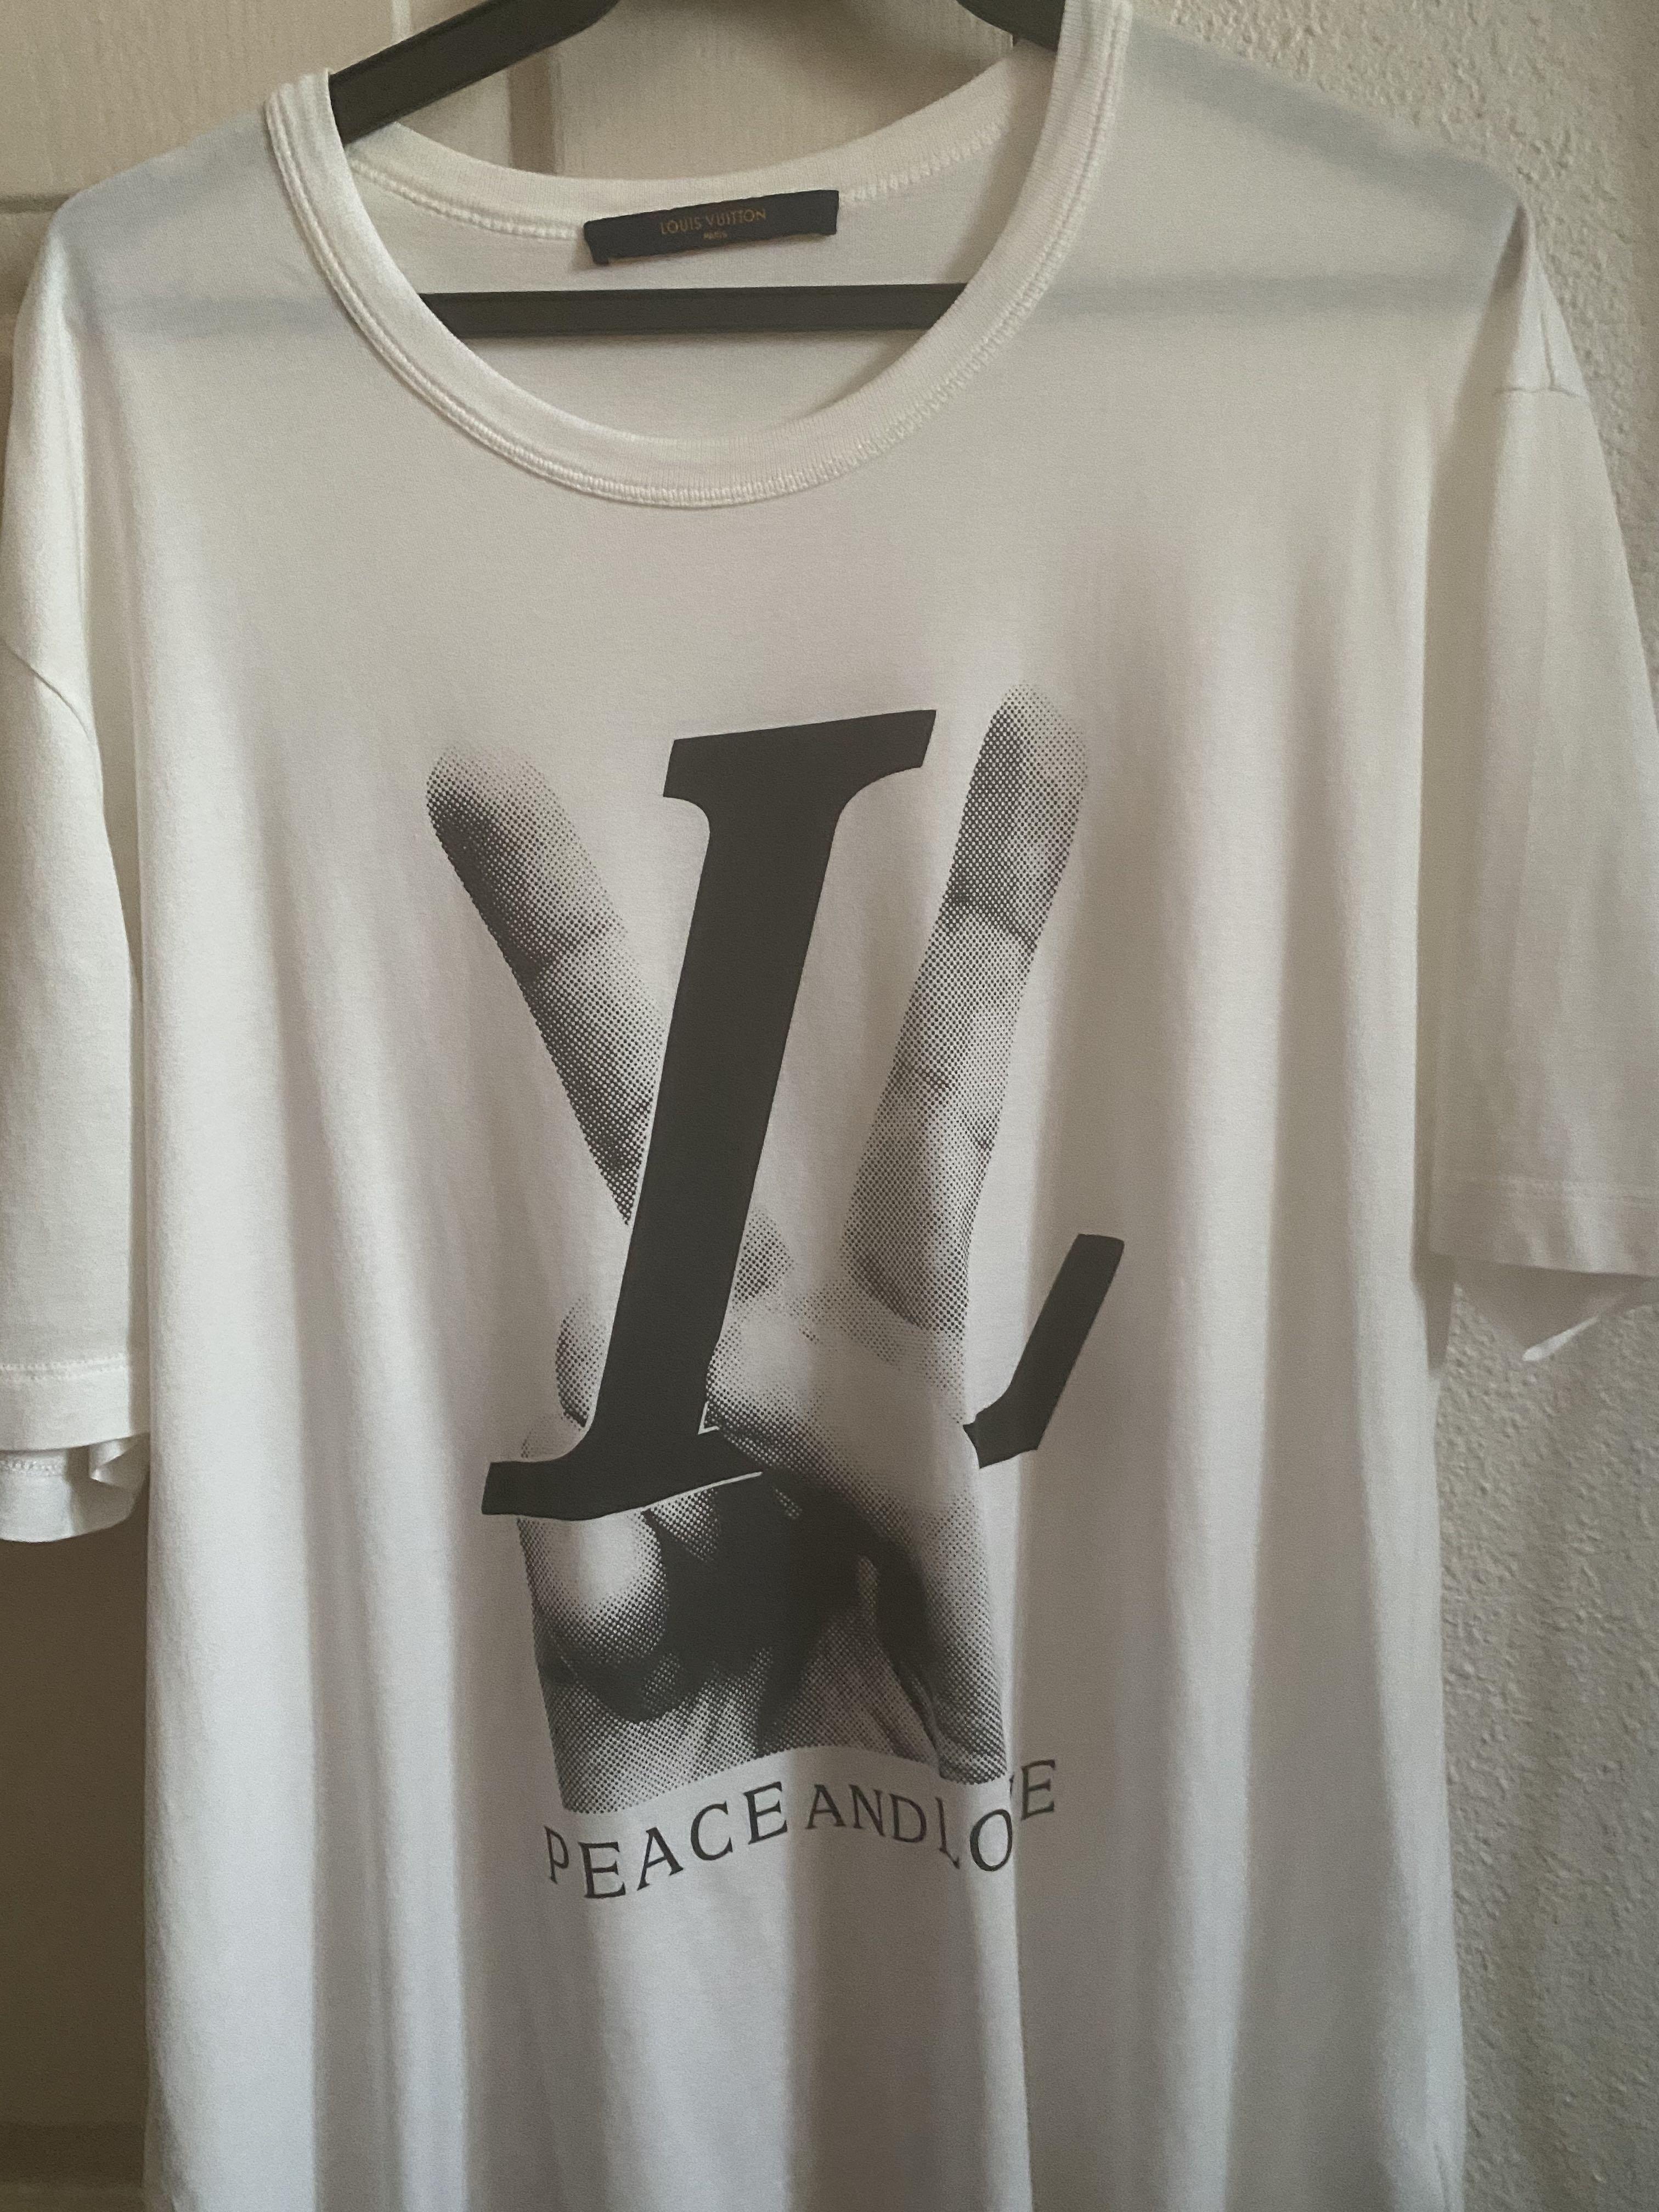 lv peace and love